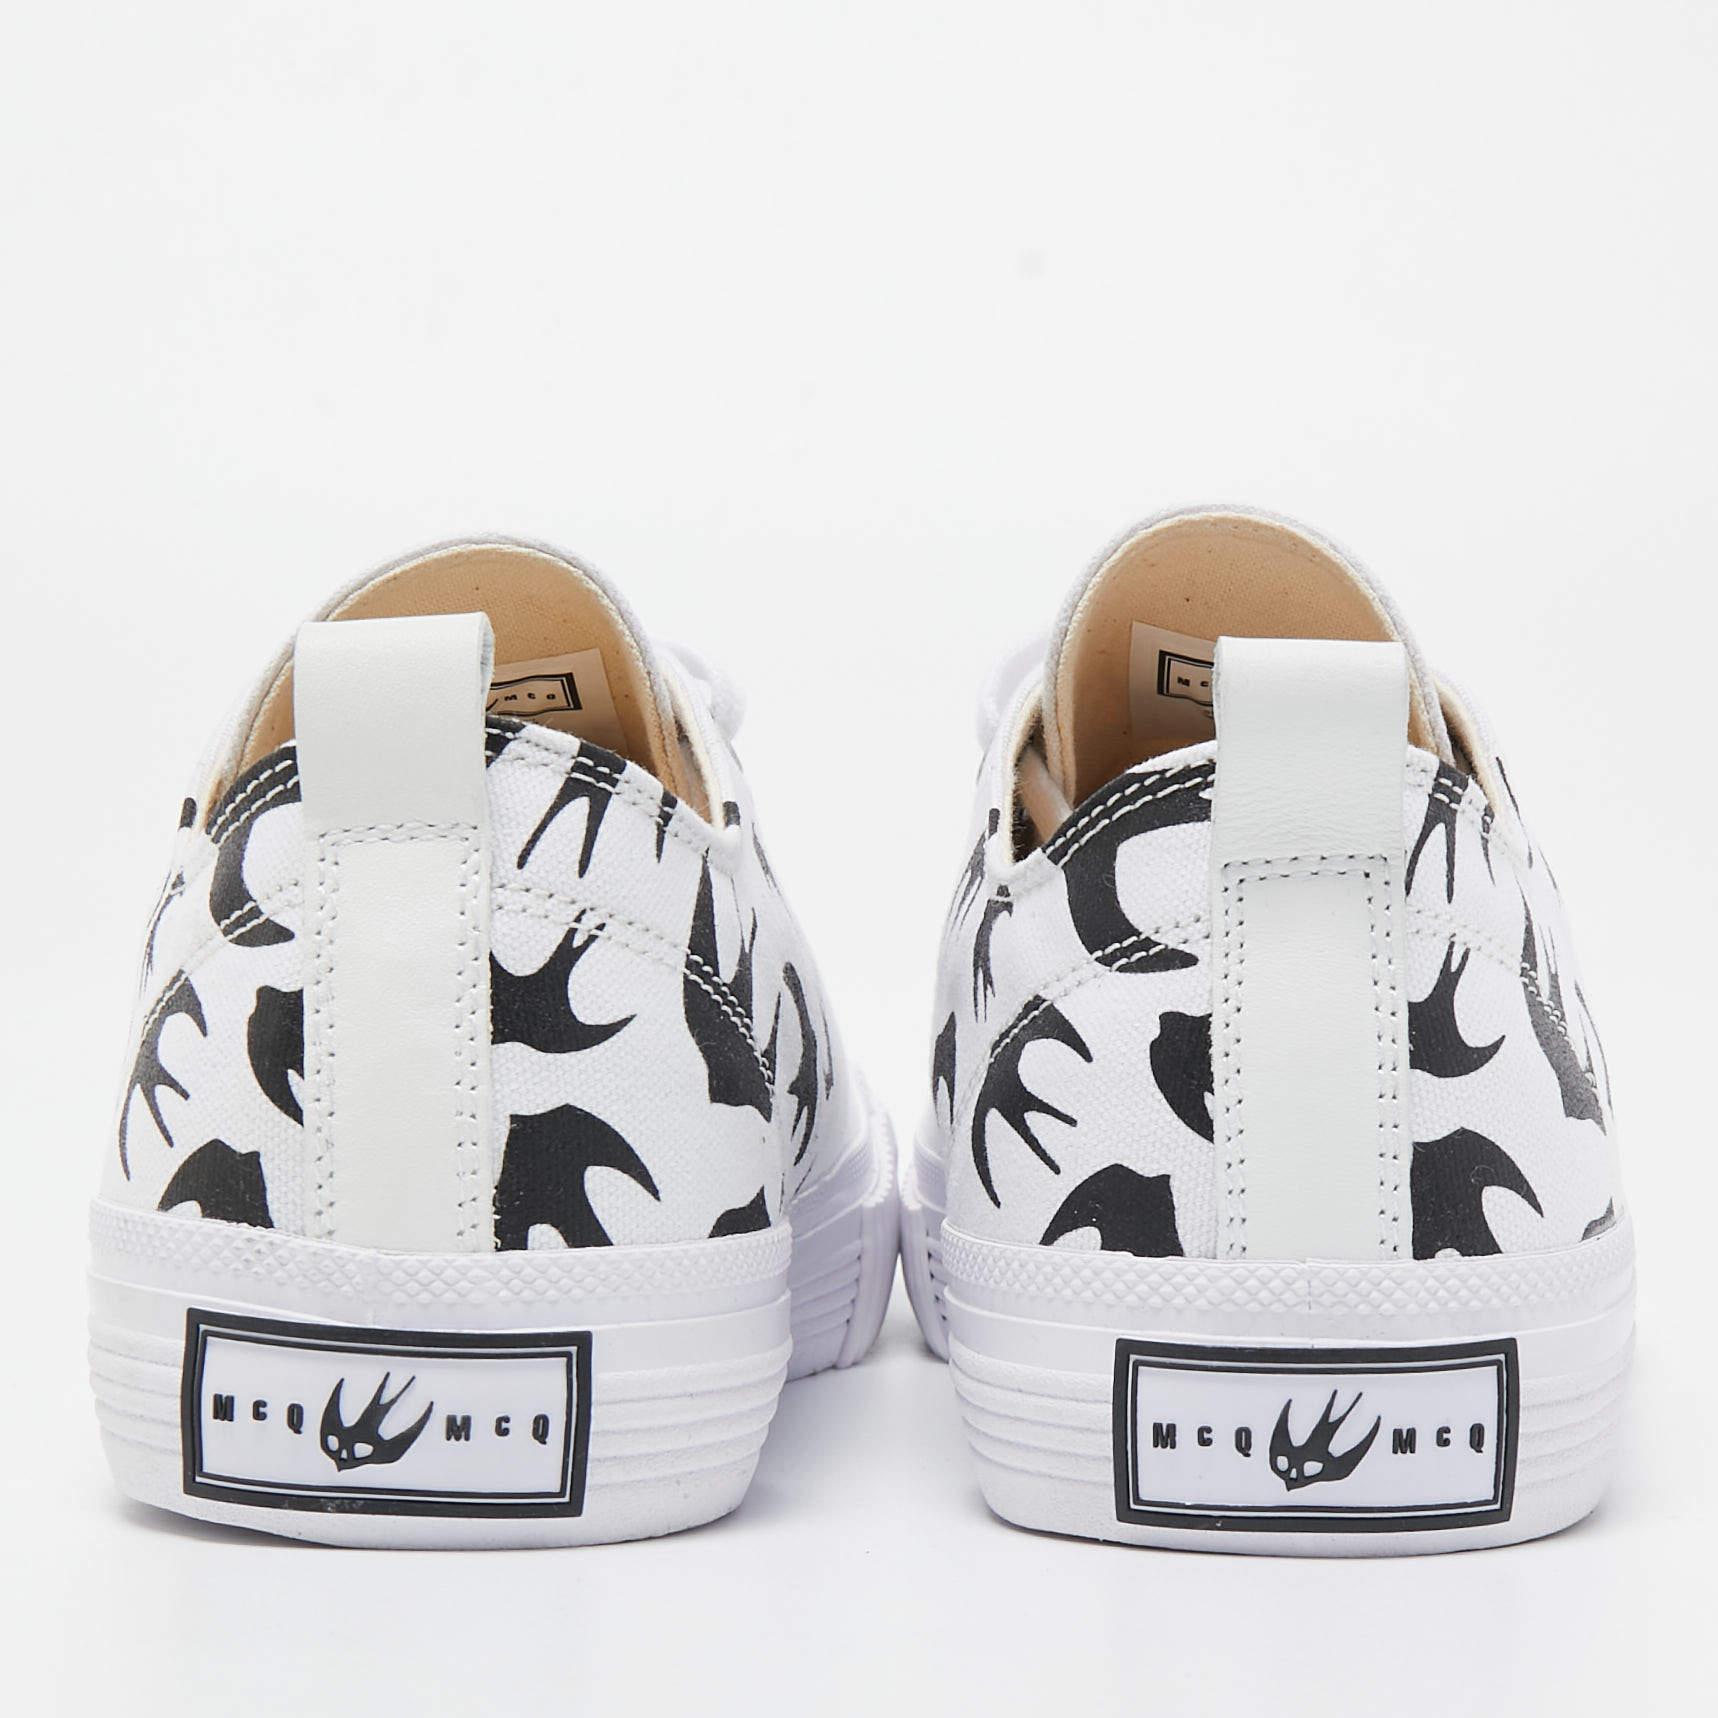 McQ by Alexander McQueen White Canvas Low Top Sneakers Size 42 2